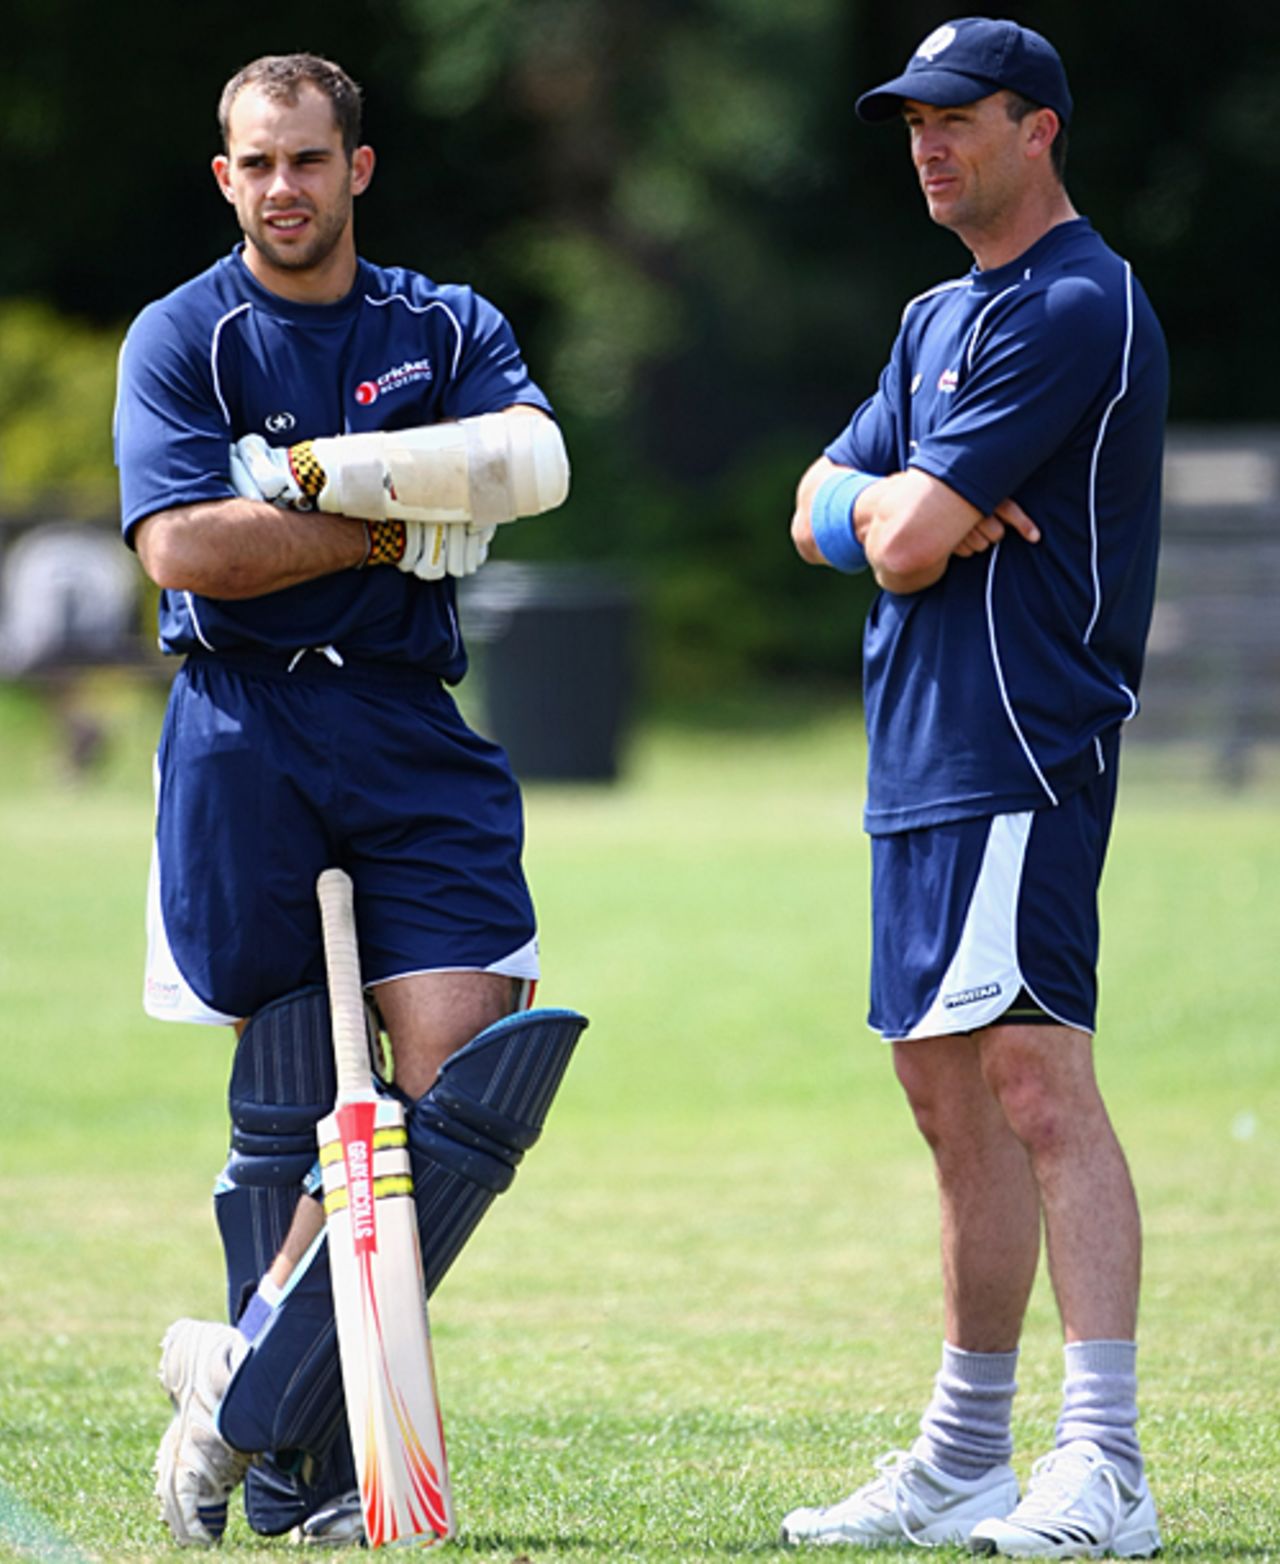 Kyle Coetzer and Gavin Hamilton look on during Scotland's practice session, London, June 4, 2009